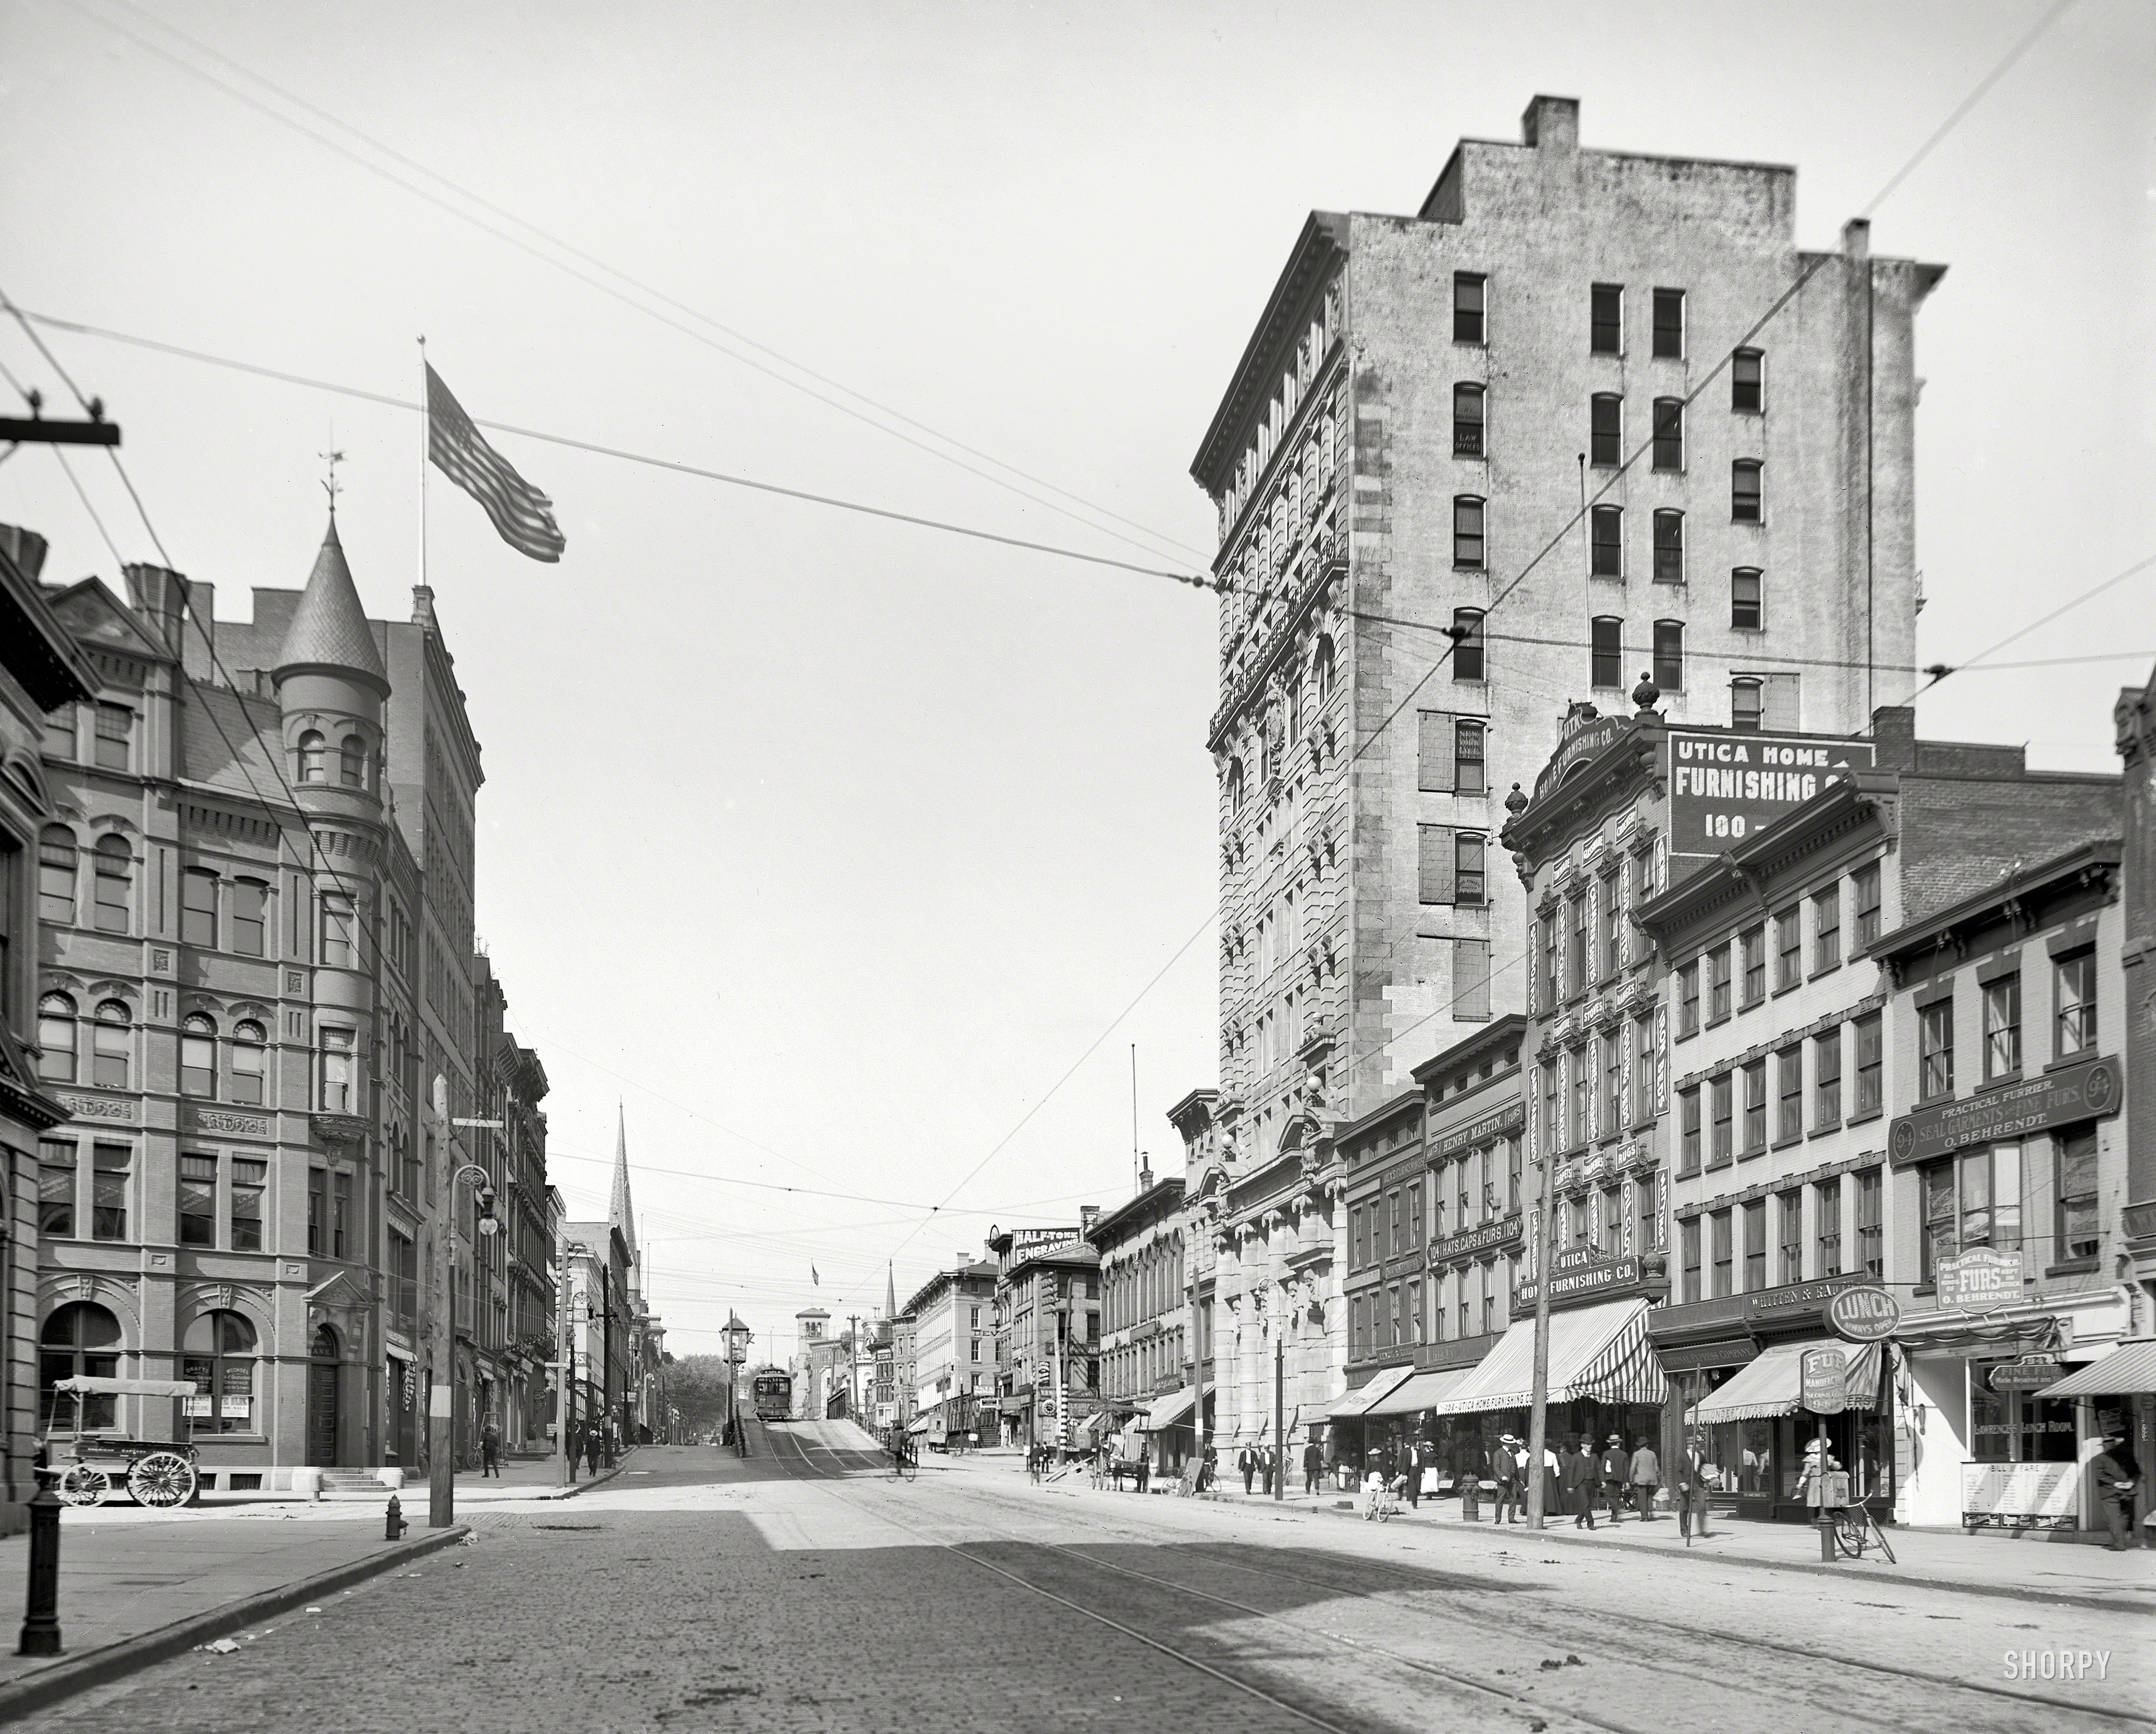 Circa 1905. "Lower Genesee Street -- Utica, New York." Note the streetcar switch tower. 8x10 inch glass negative, Detroit Publishing Co. View full size.